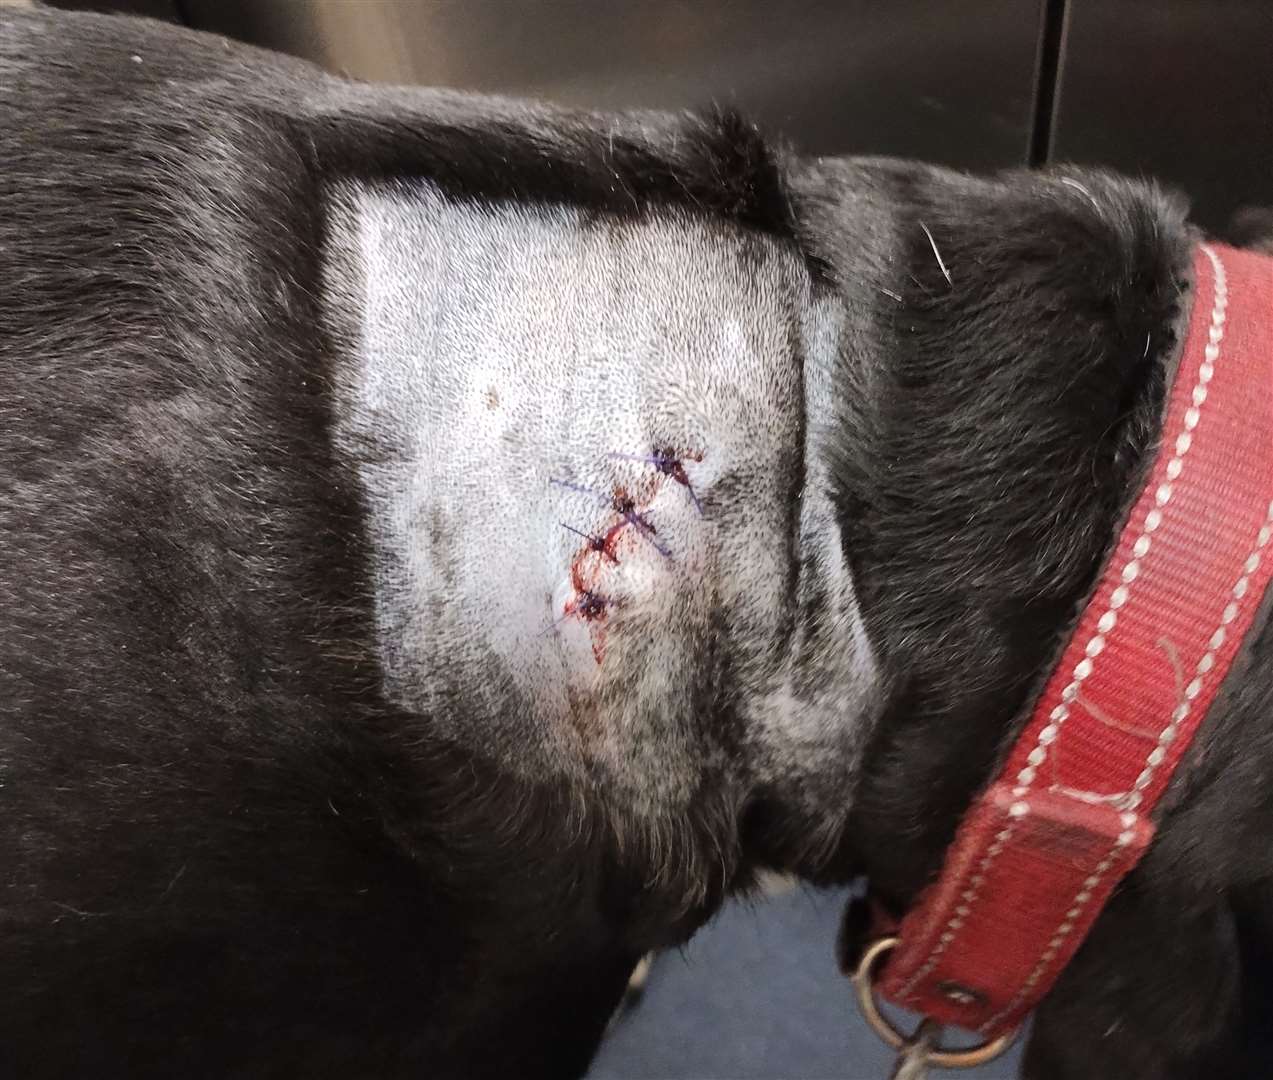 Dolly needed stitches in her neck following the attack